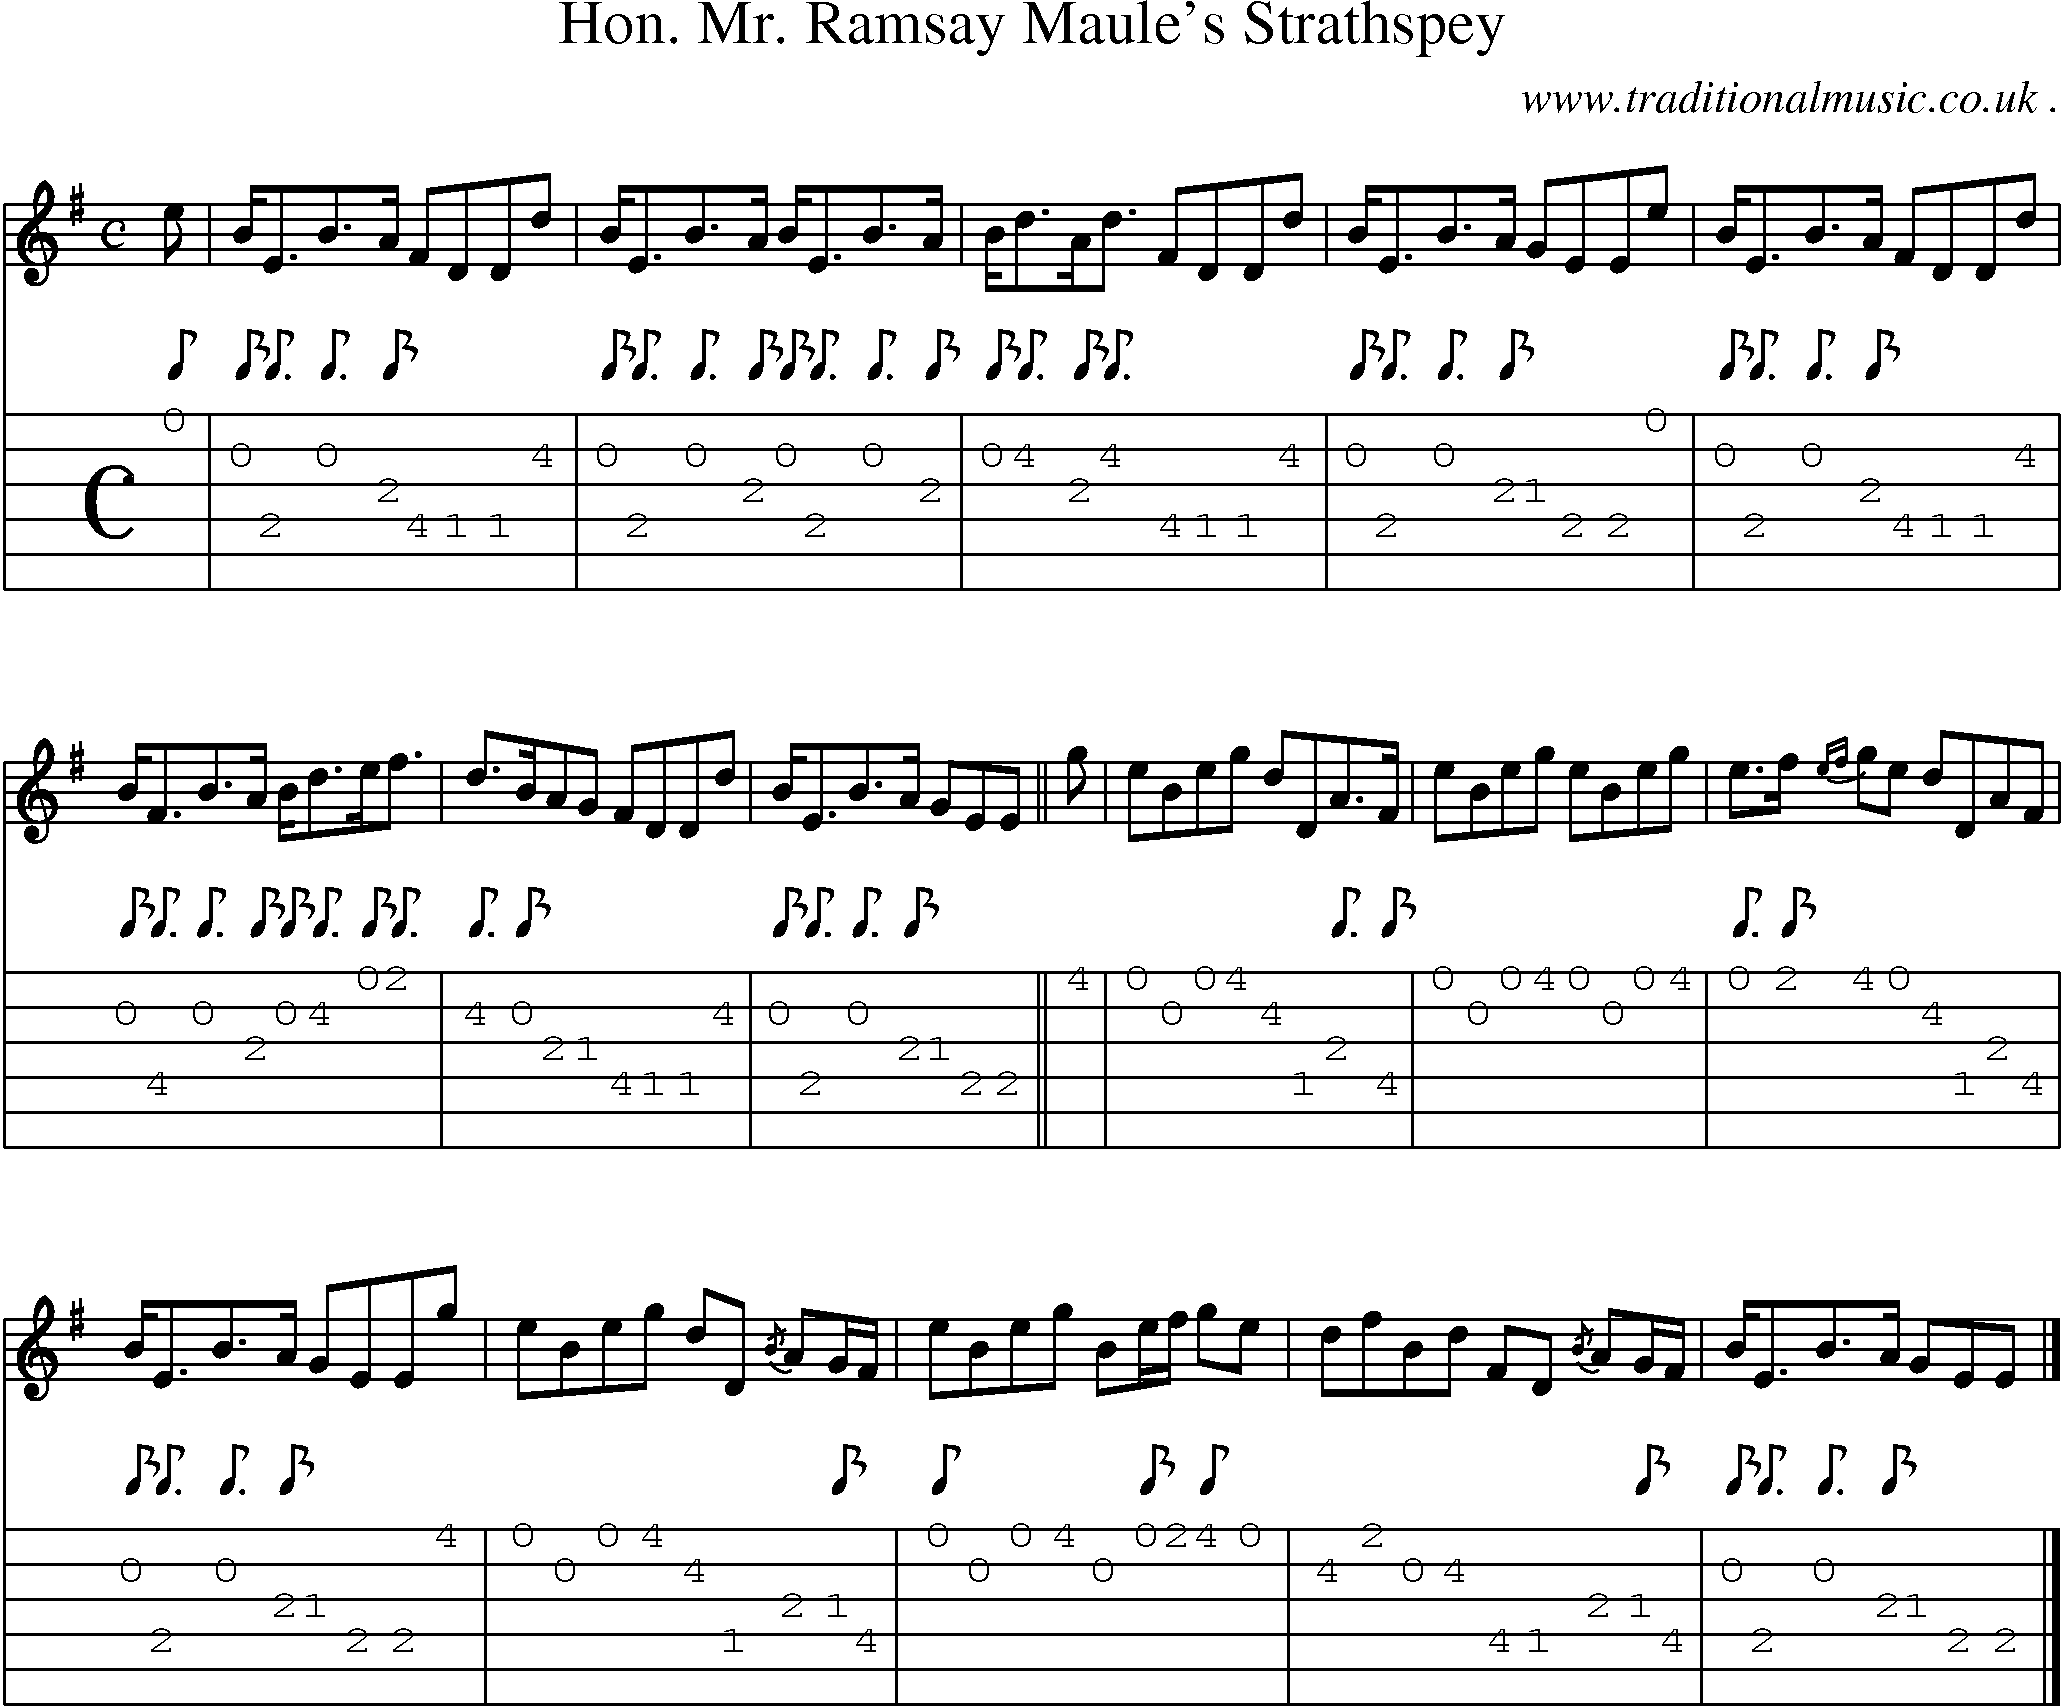 Sheet-music  score, Chords and Guitar Tabs for Hon Mr Ramsay Maules Strathspey